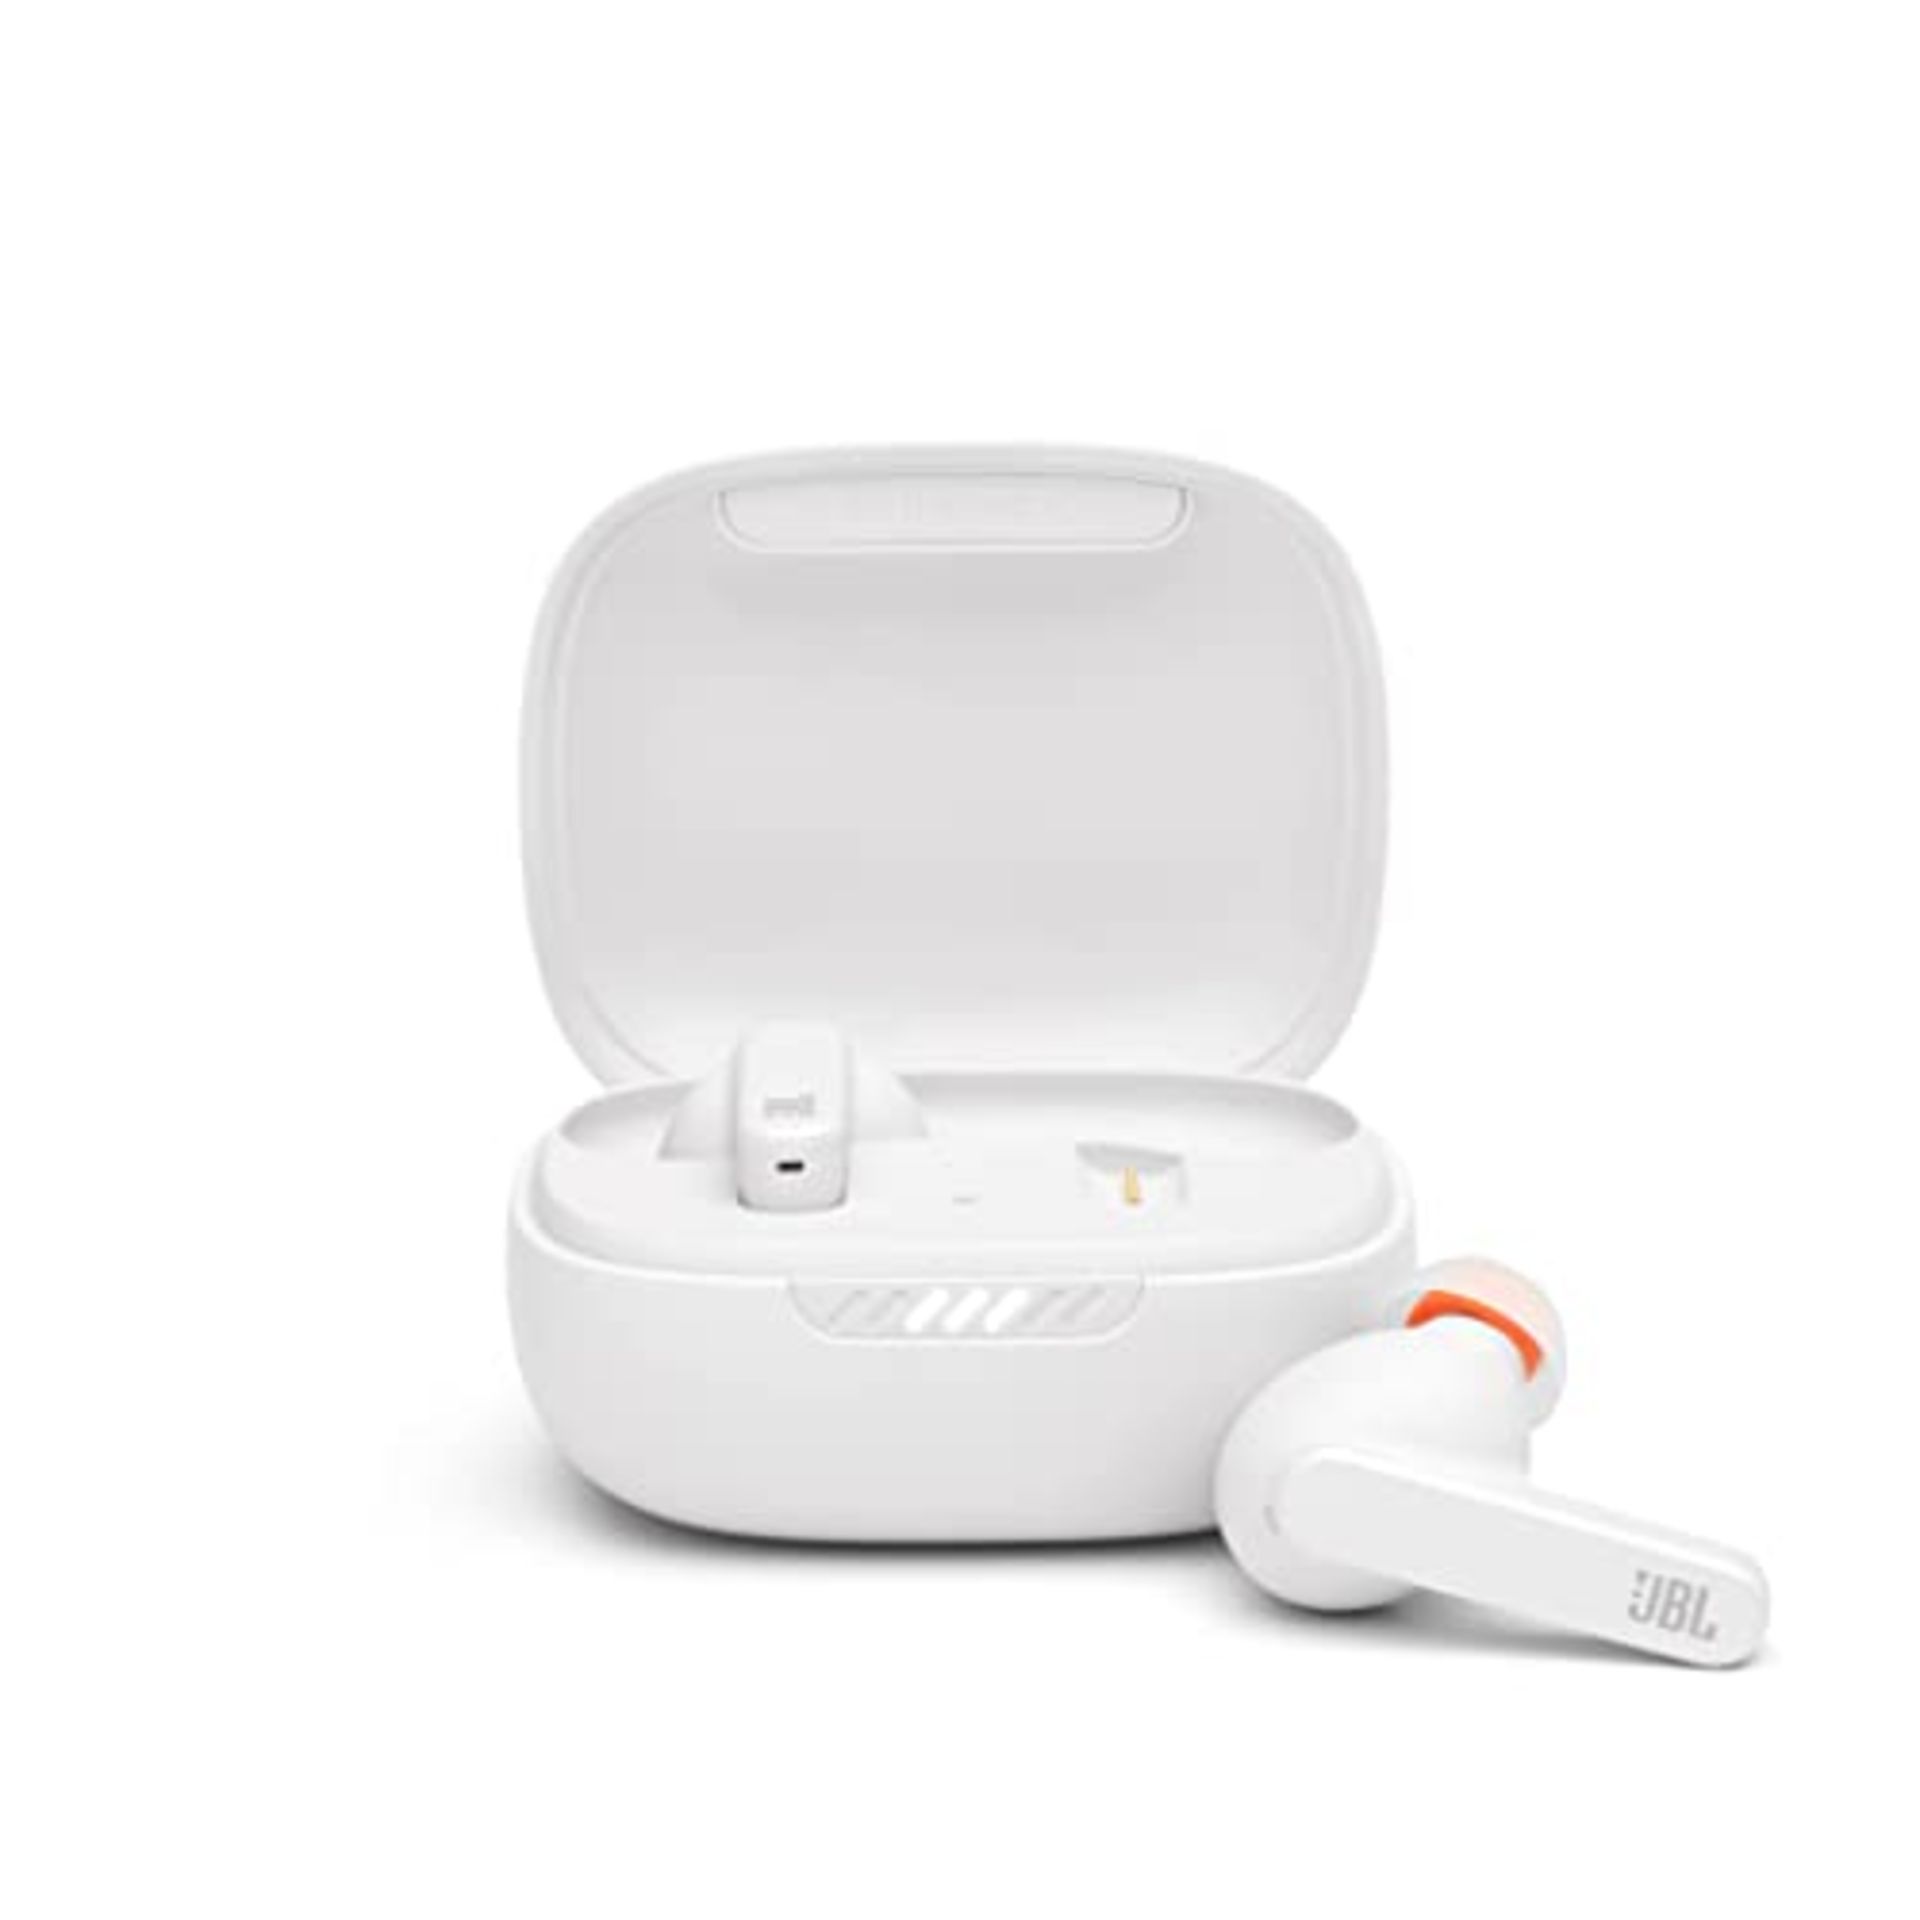 RRP £151.00 JBL LIVE PRO+ TWS - Wireless Bluetooth earbuds - Adaptive Noise Cancellation and Smart